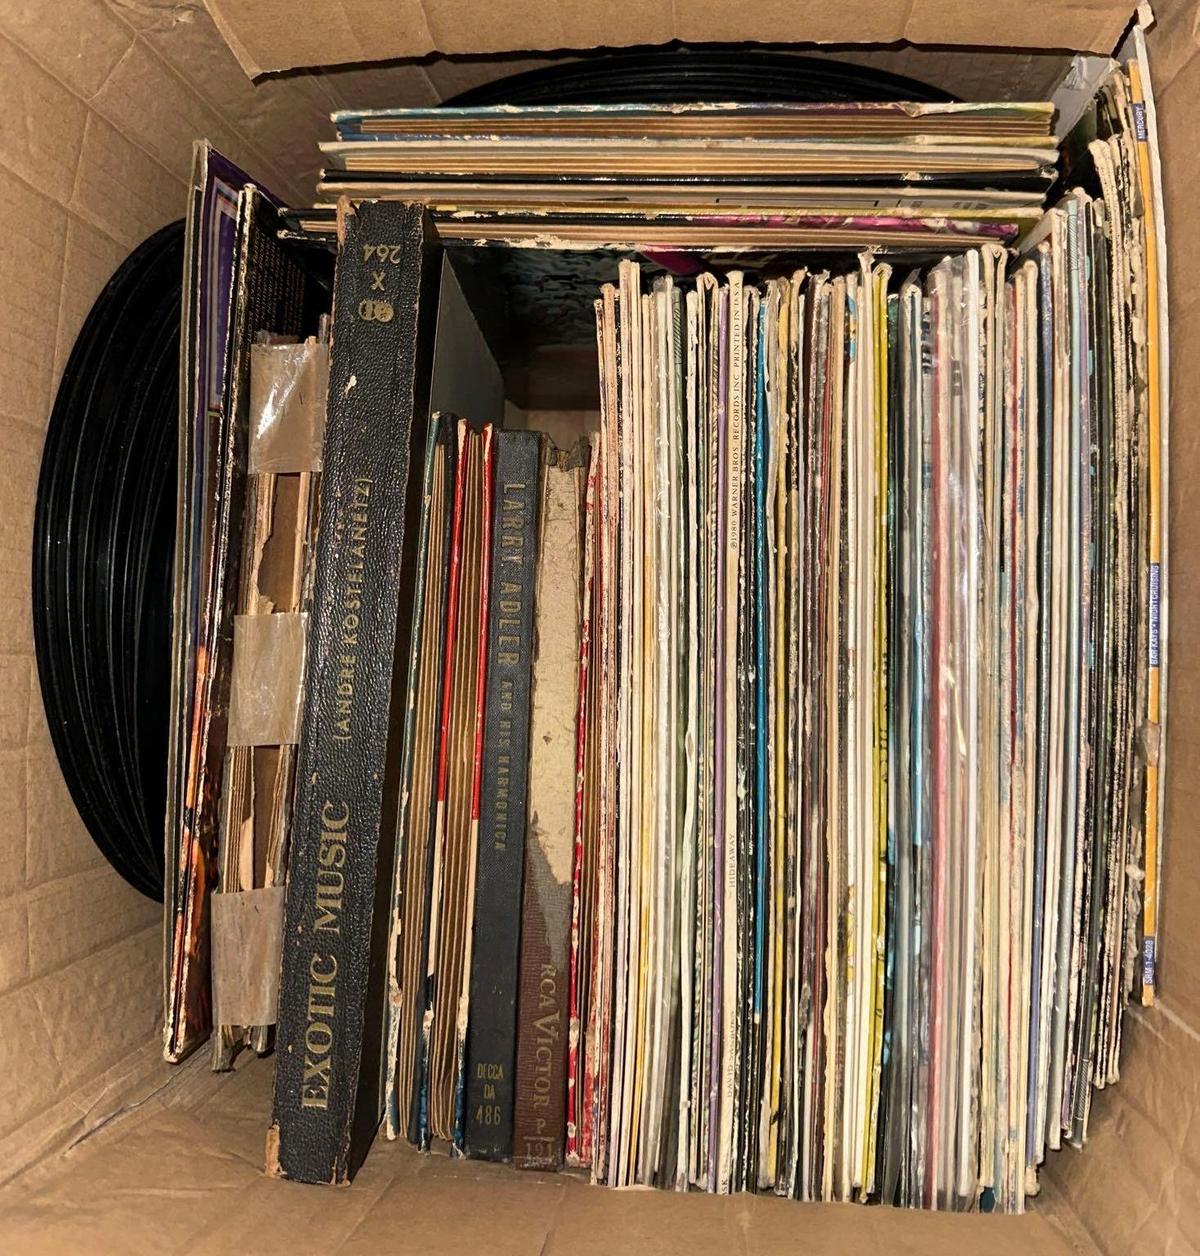 Huge Box of Record Albums